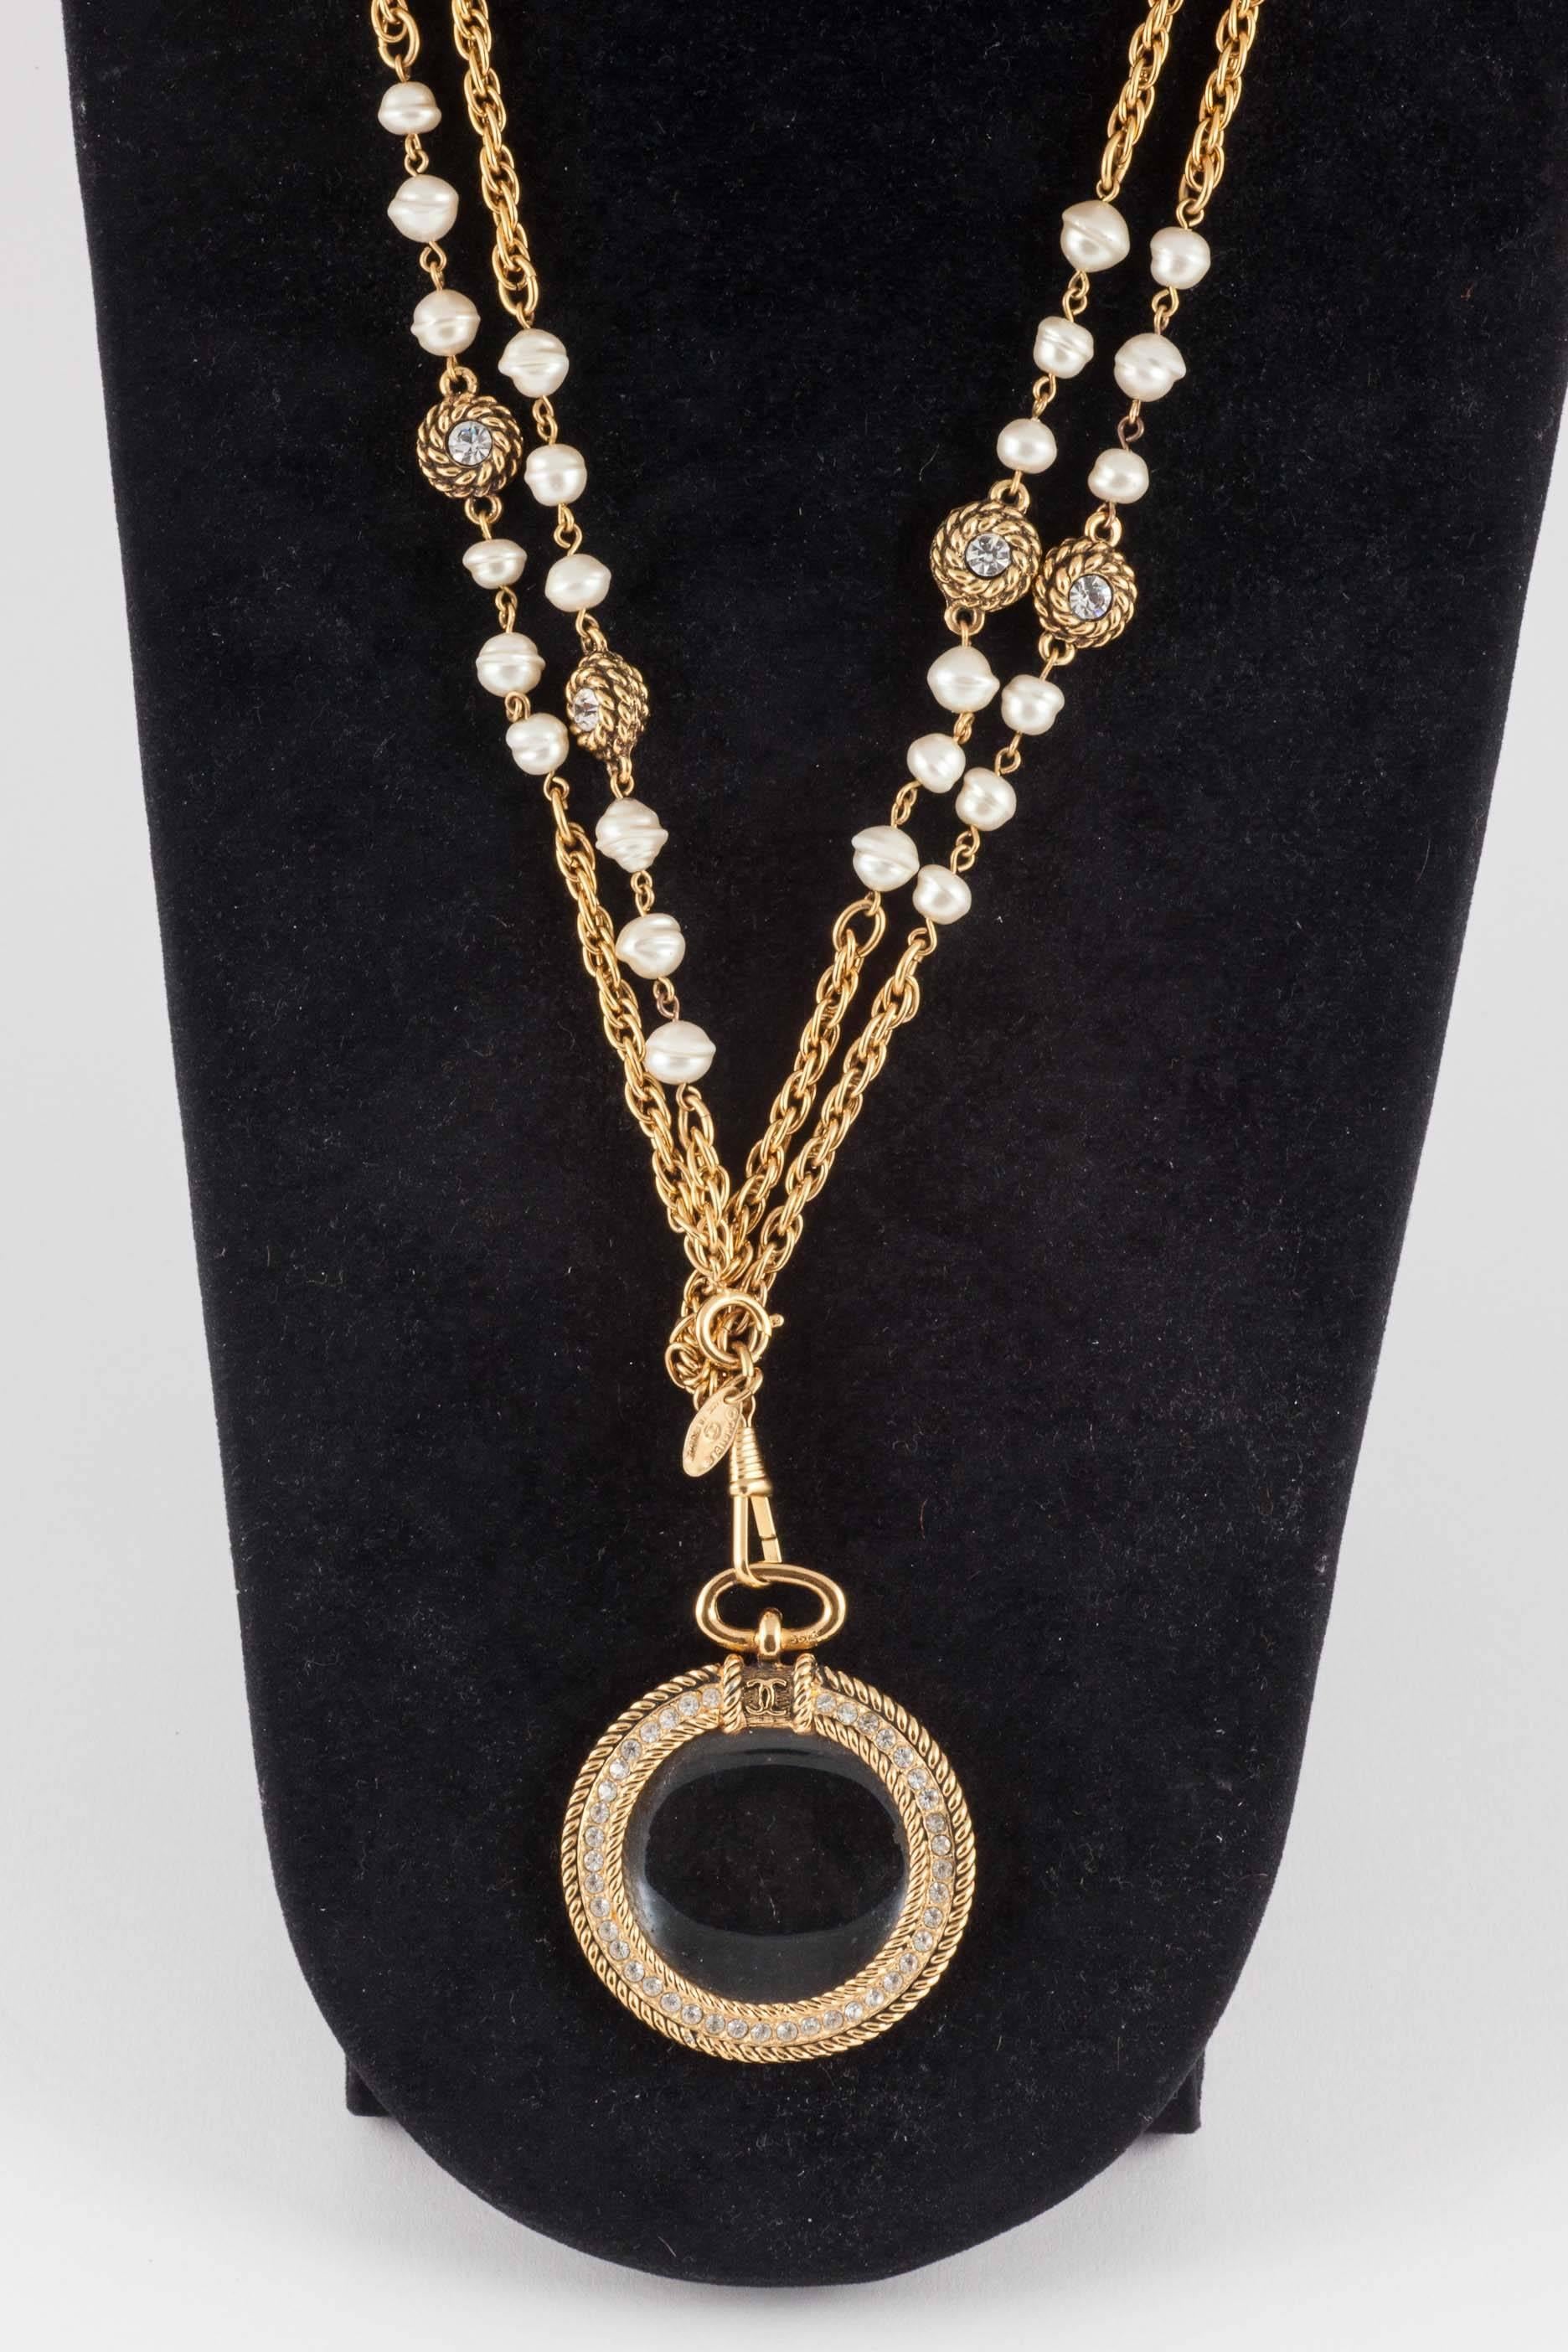 Quirky and chic pendant necklace from Chanel, in the 1980s. Highly characteristic of this period, it is made from glass baroque pearls, paste and gilt metal chain, sporting a most useful magnifying pendant. This highly popular and iconic necklace